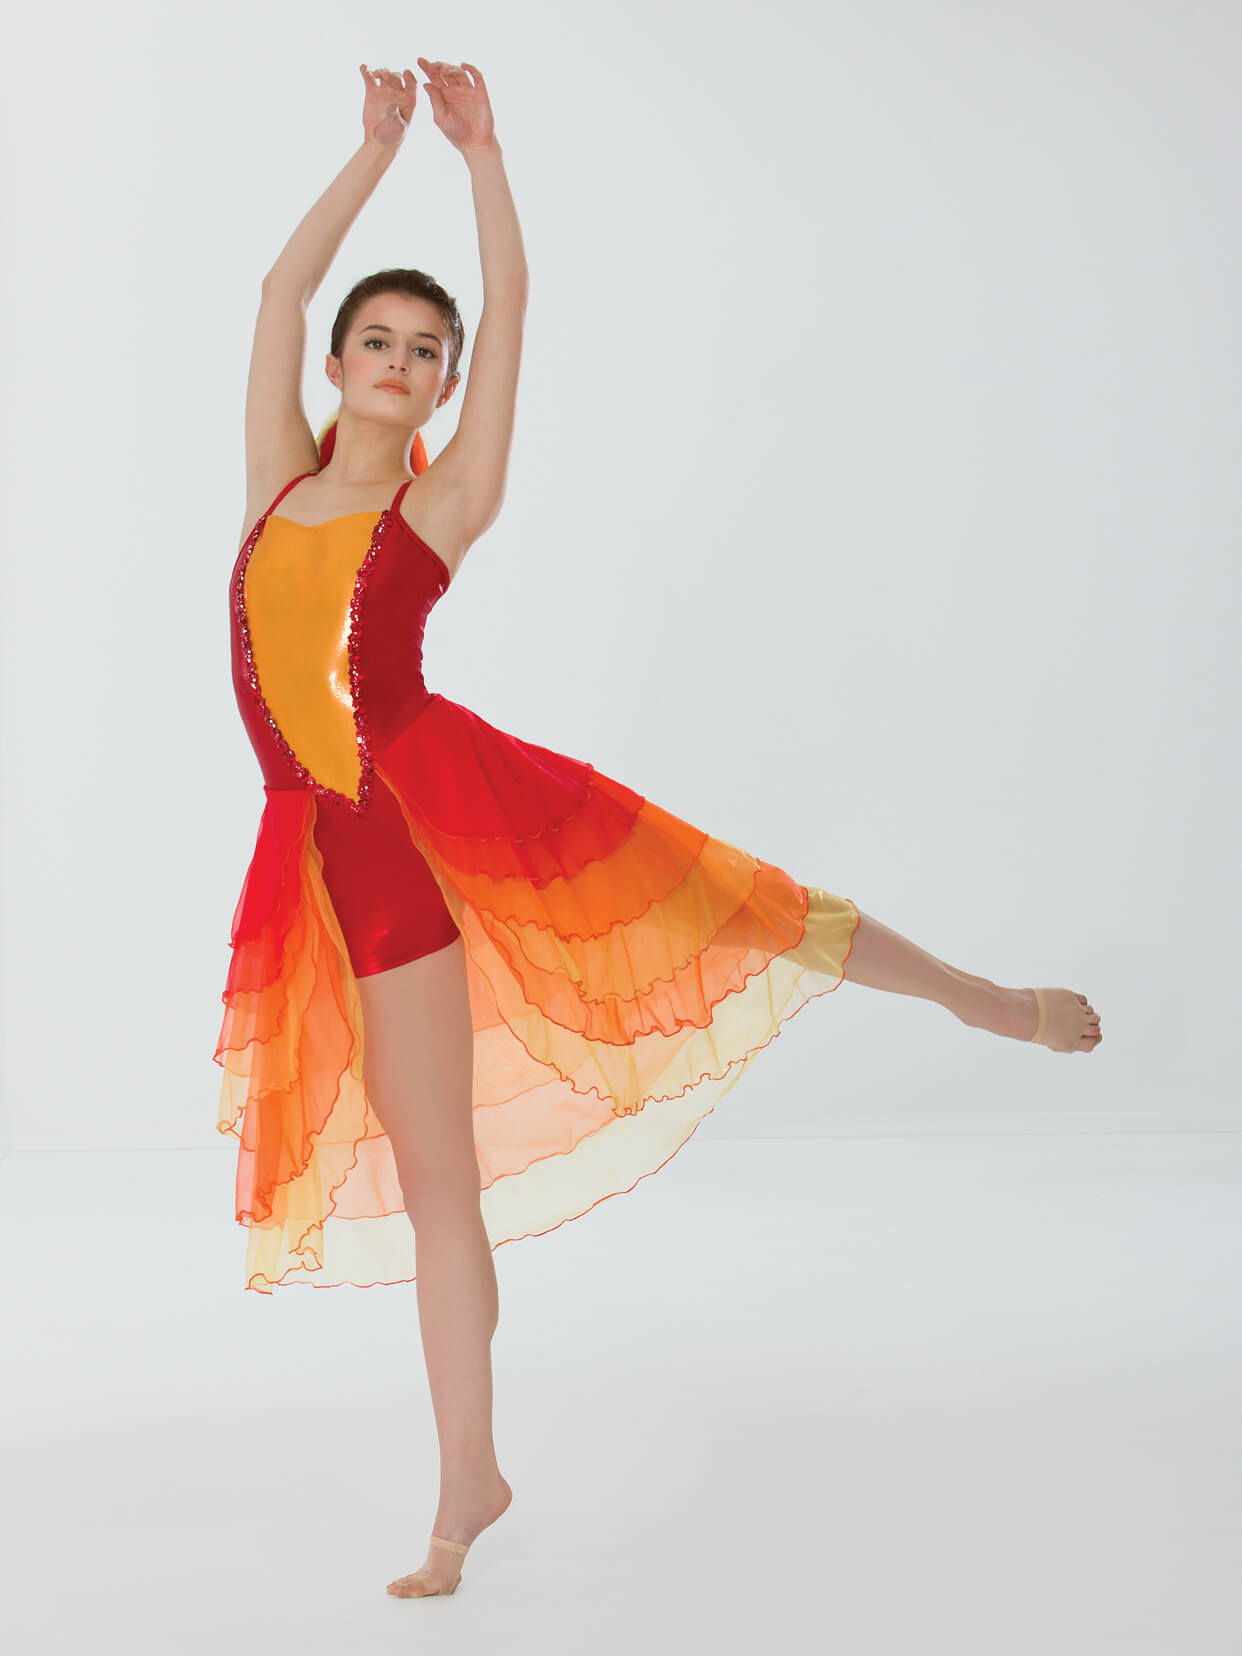 Girl on Fire - Discount Dance Costumes